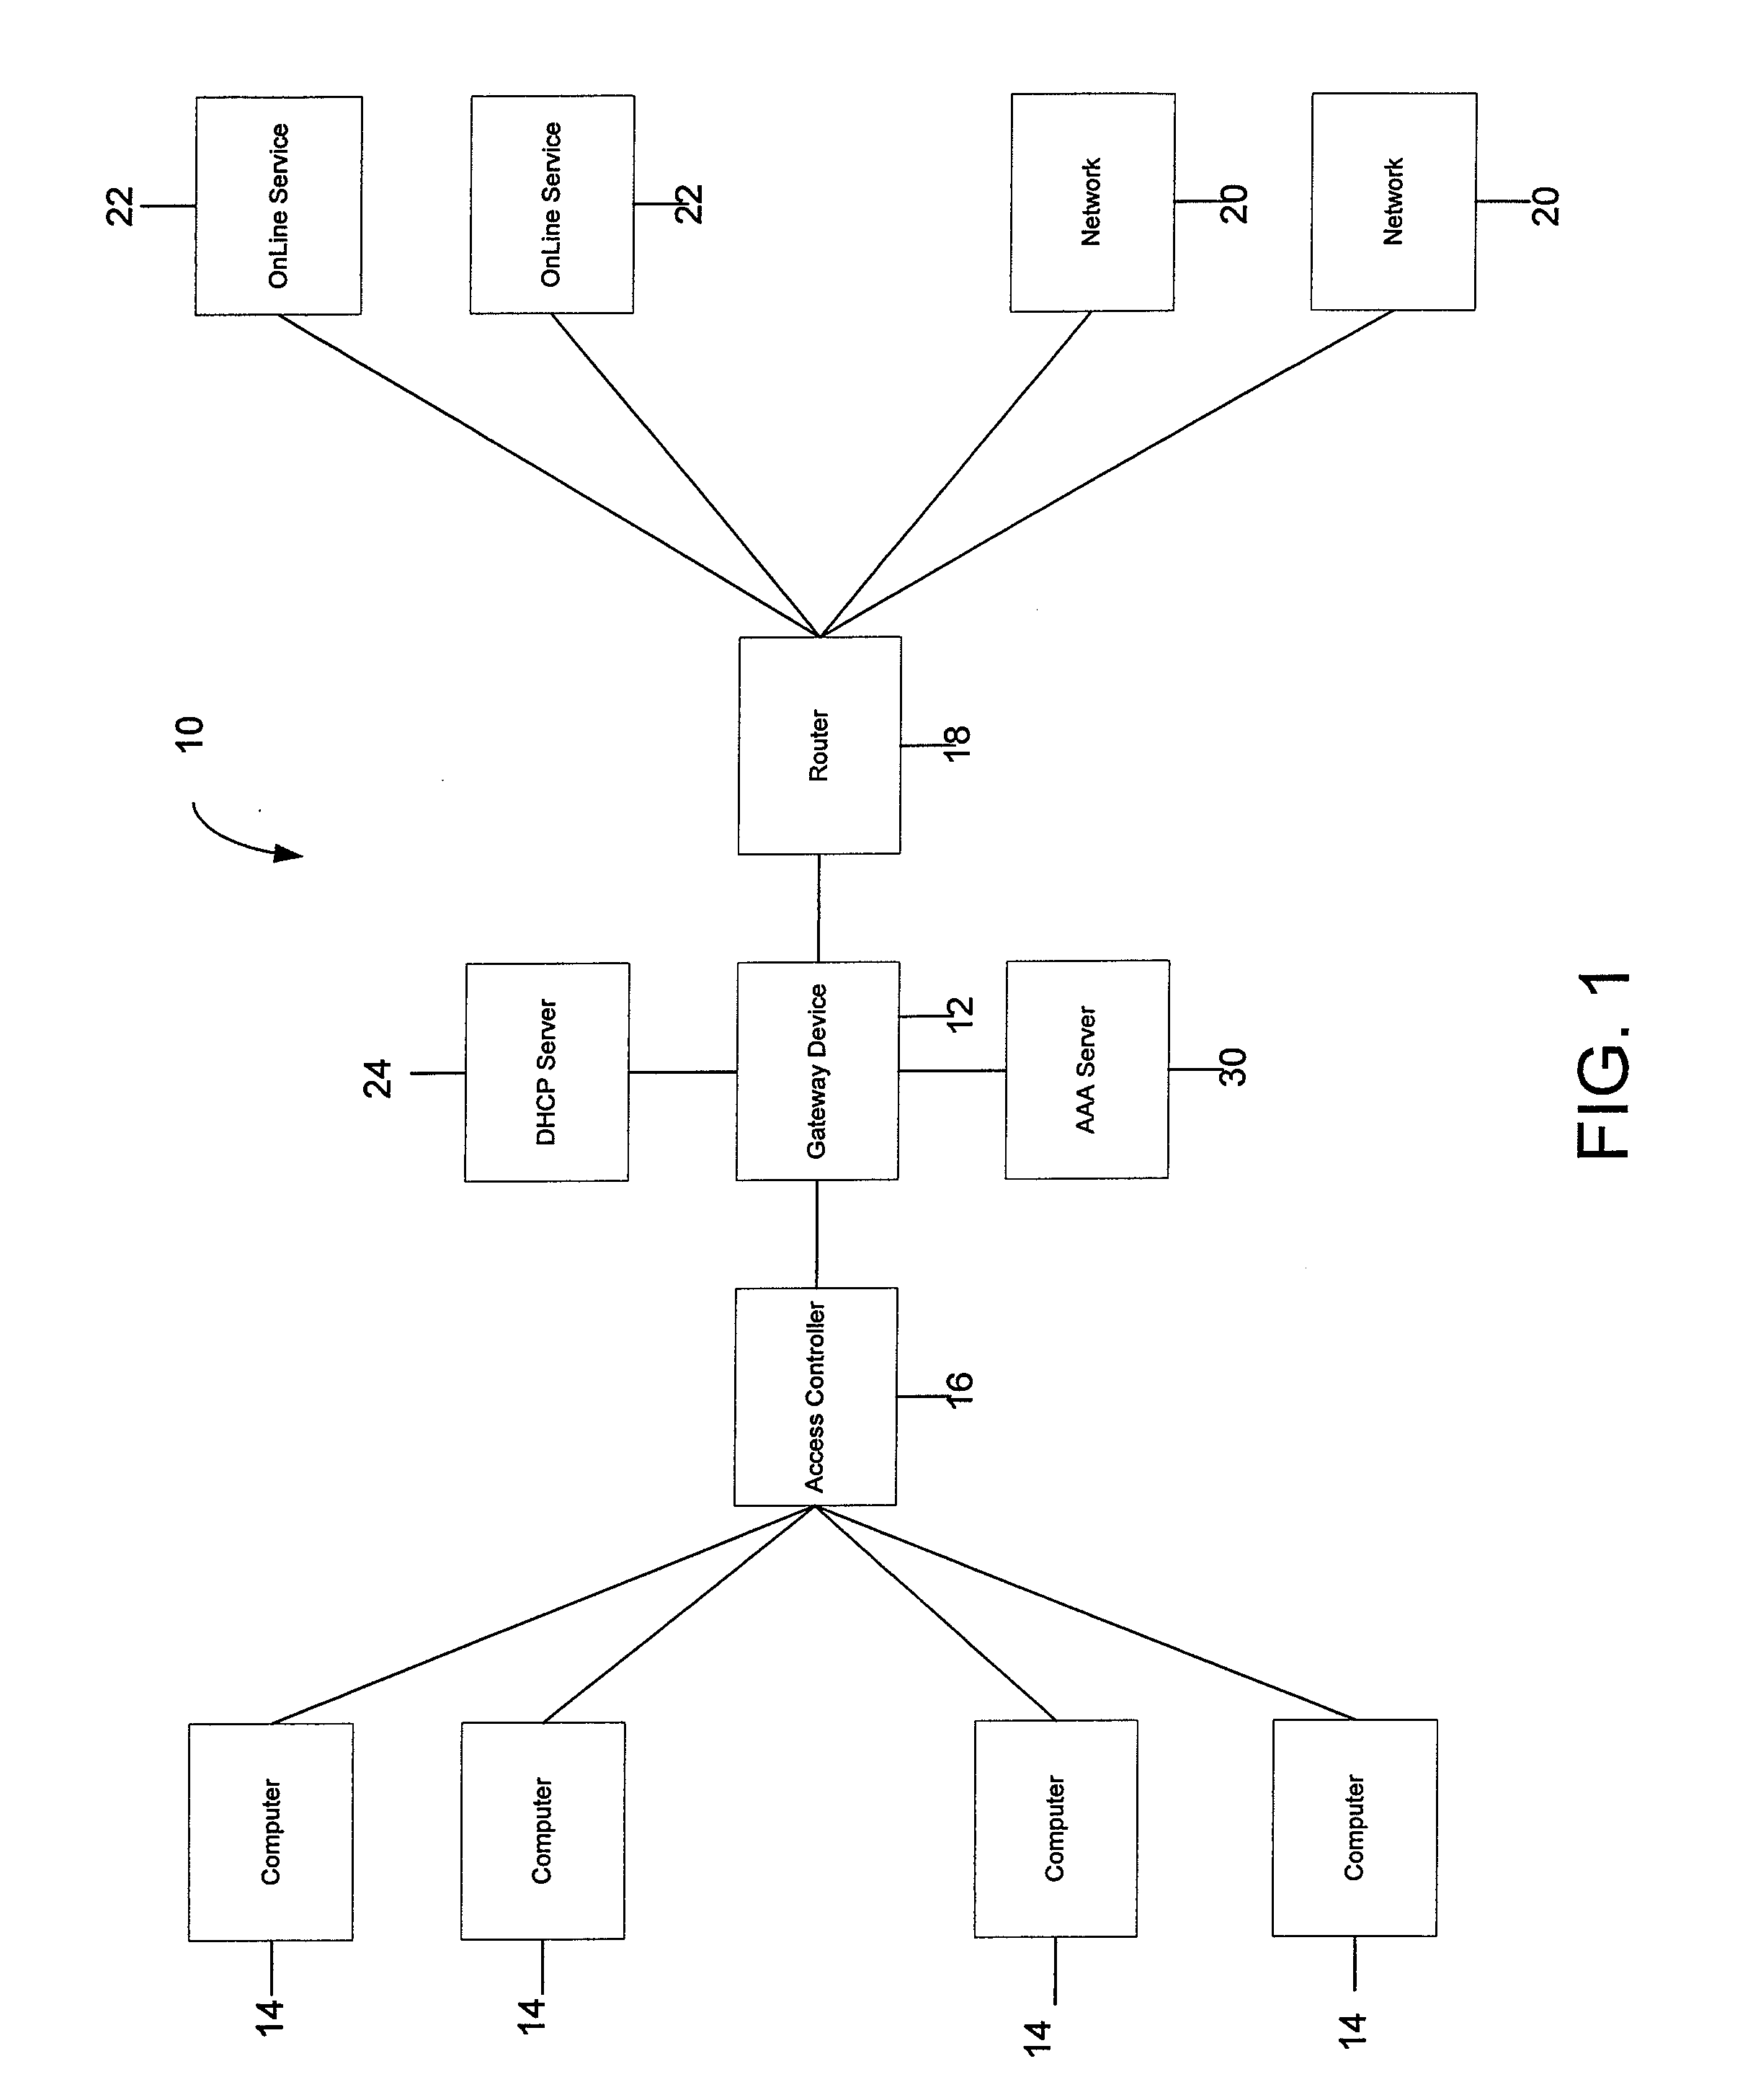 Systems and methods for providing dynamic network authorization, authentication and accounting